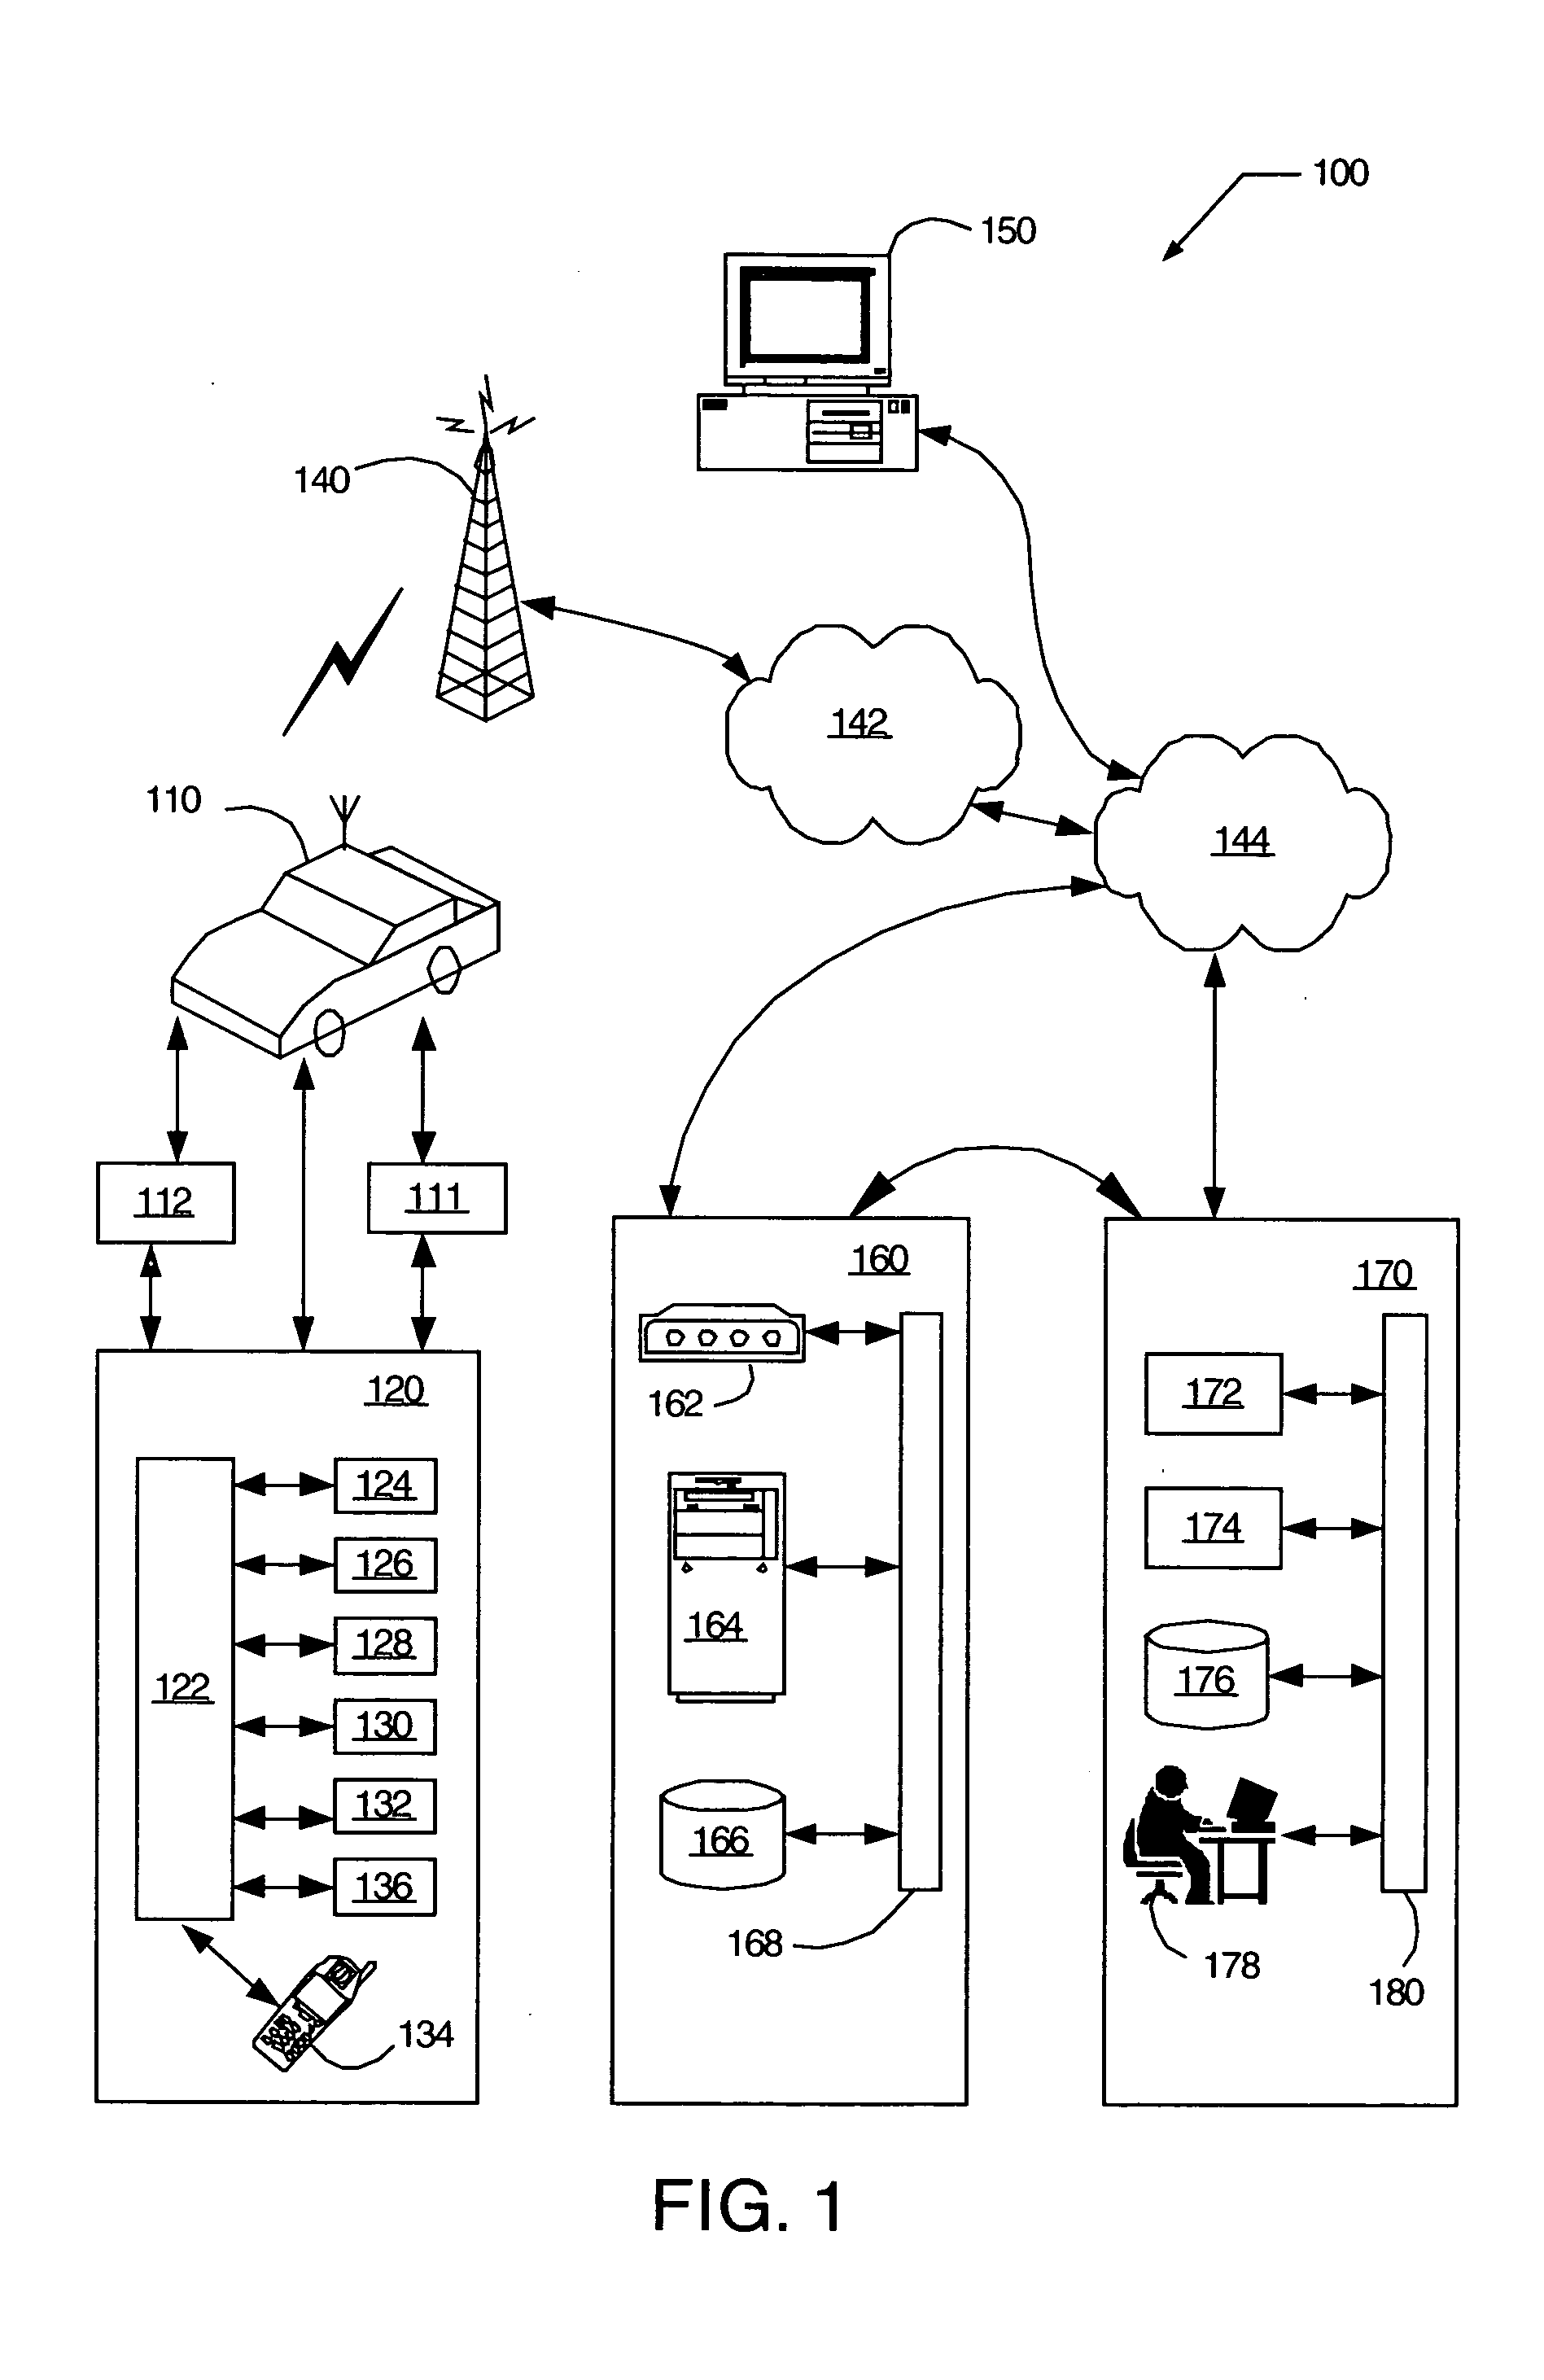 Web-enabled configurable quality data collection tool